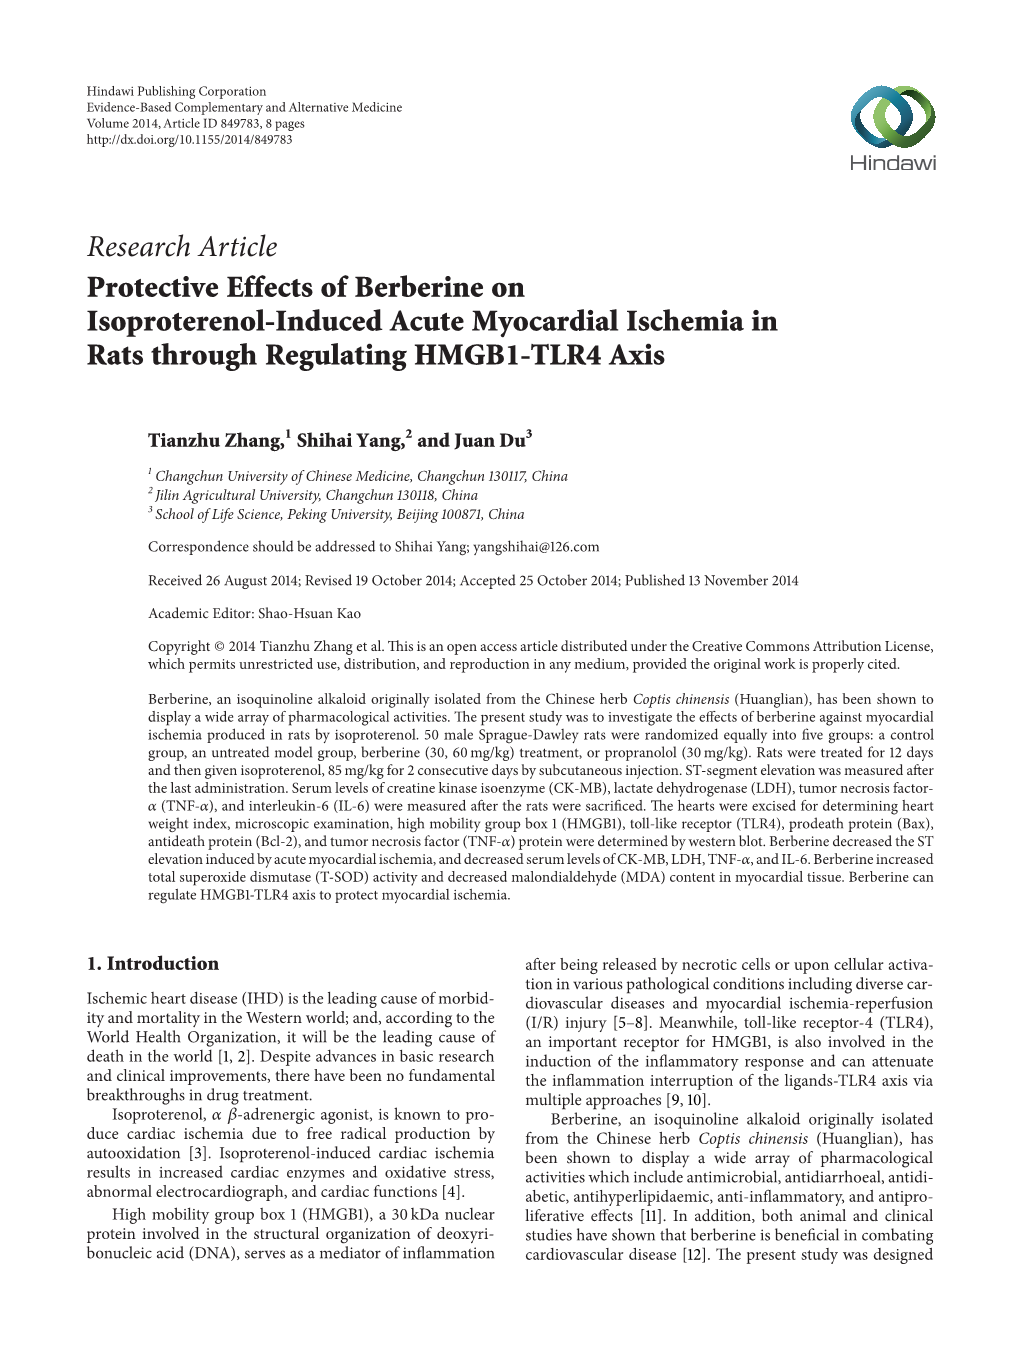 Research Article Protective Effects of Berberine on Isoproterenol-Induced Acute Myocardial Ischemia in Rats Through Regulating HMGB1-TLR4 Axis